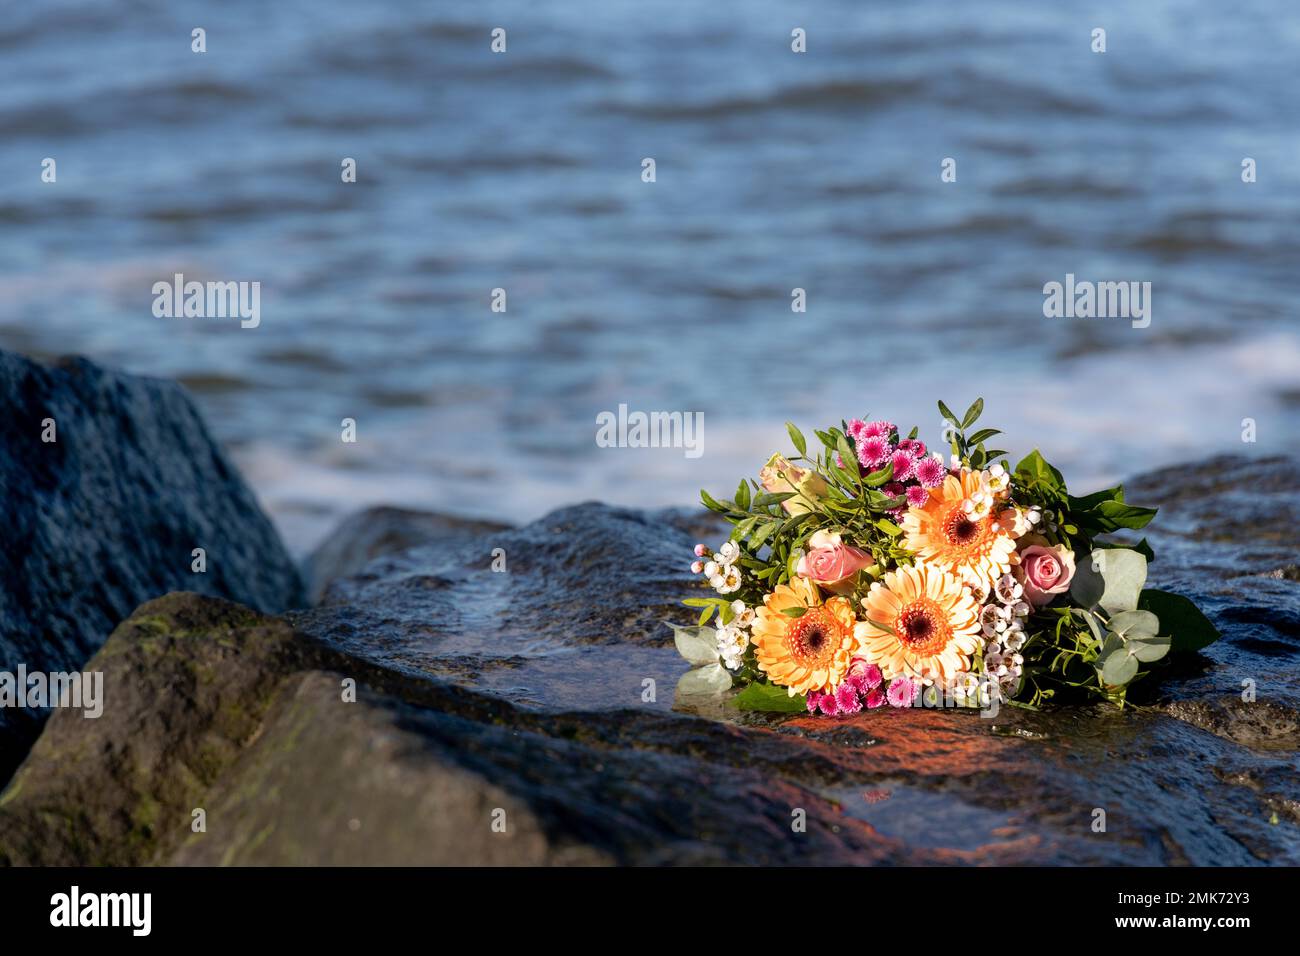 Bouquet Remembrance Opfer Seefahrende Ostsee Stockfoto